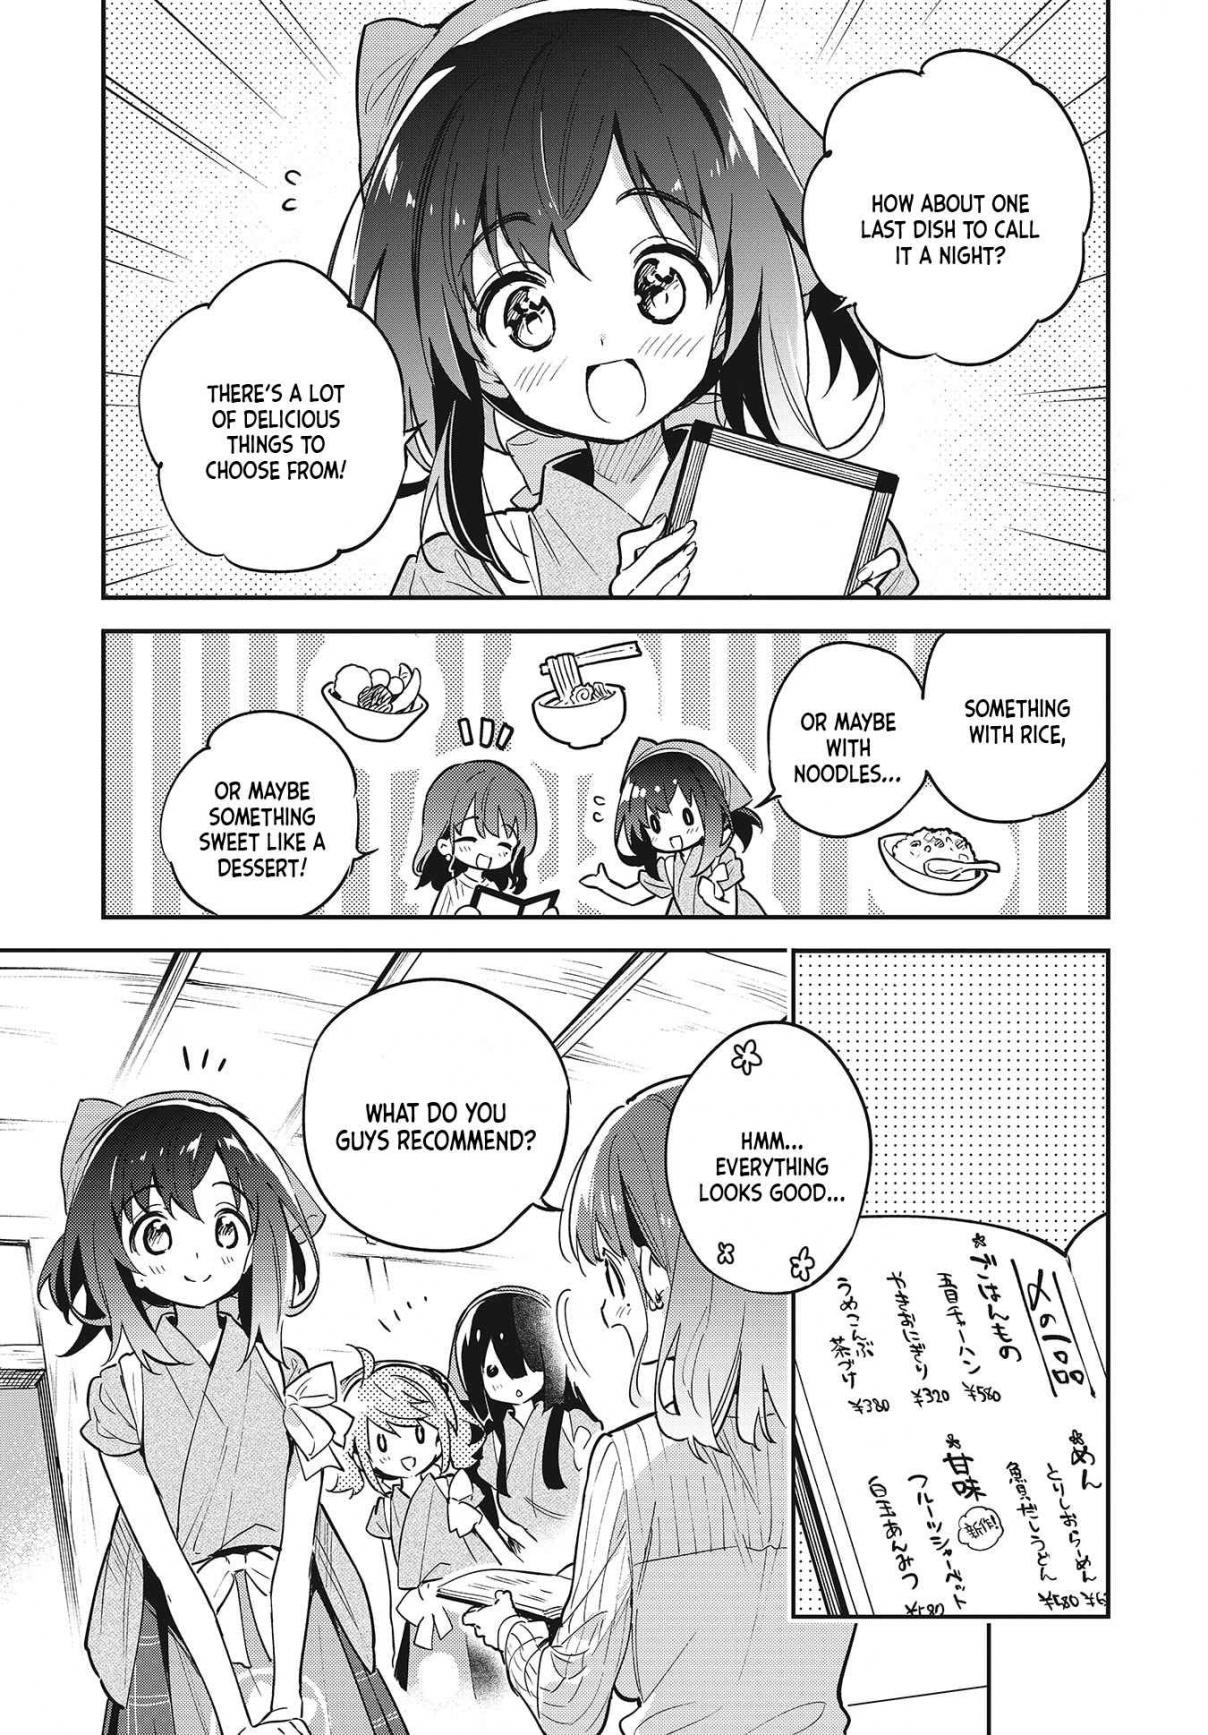 Chotto Ippai! Vol. 6 Ch. 39 The way, the road